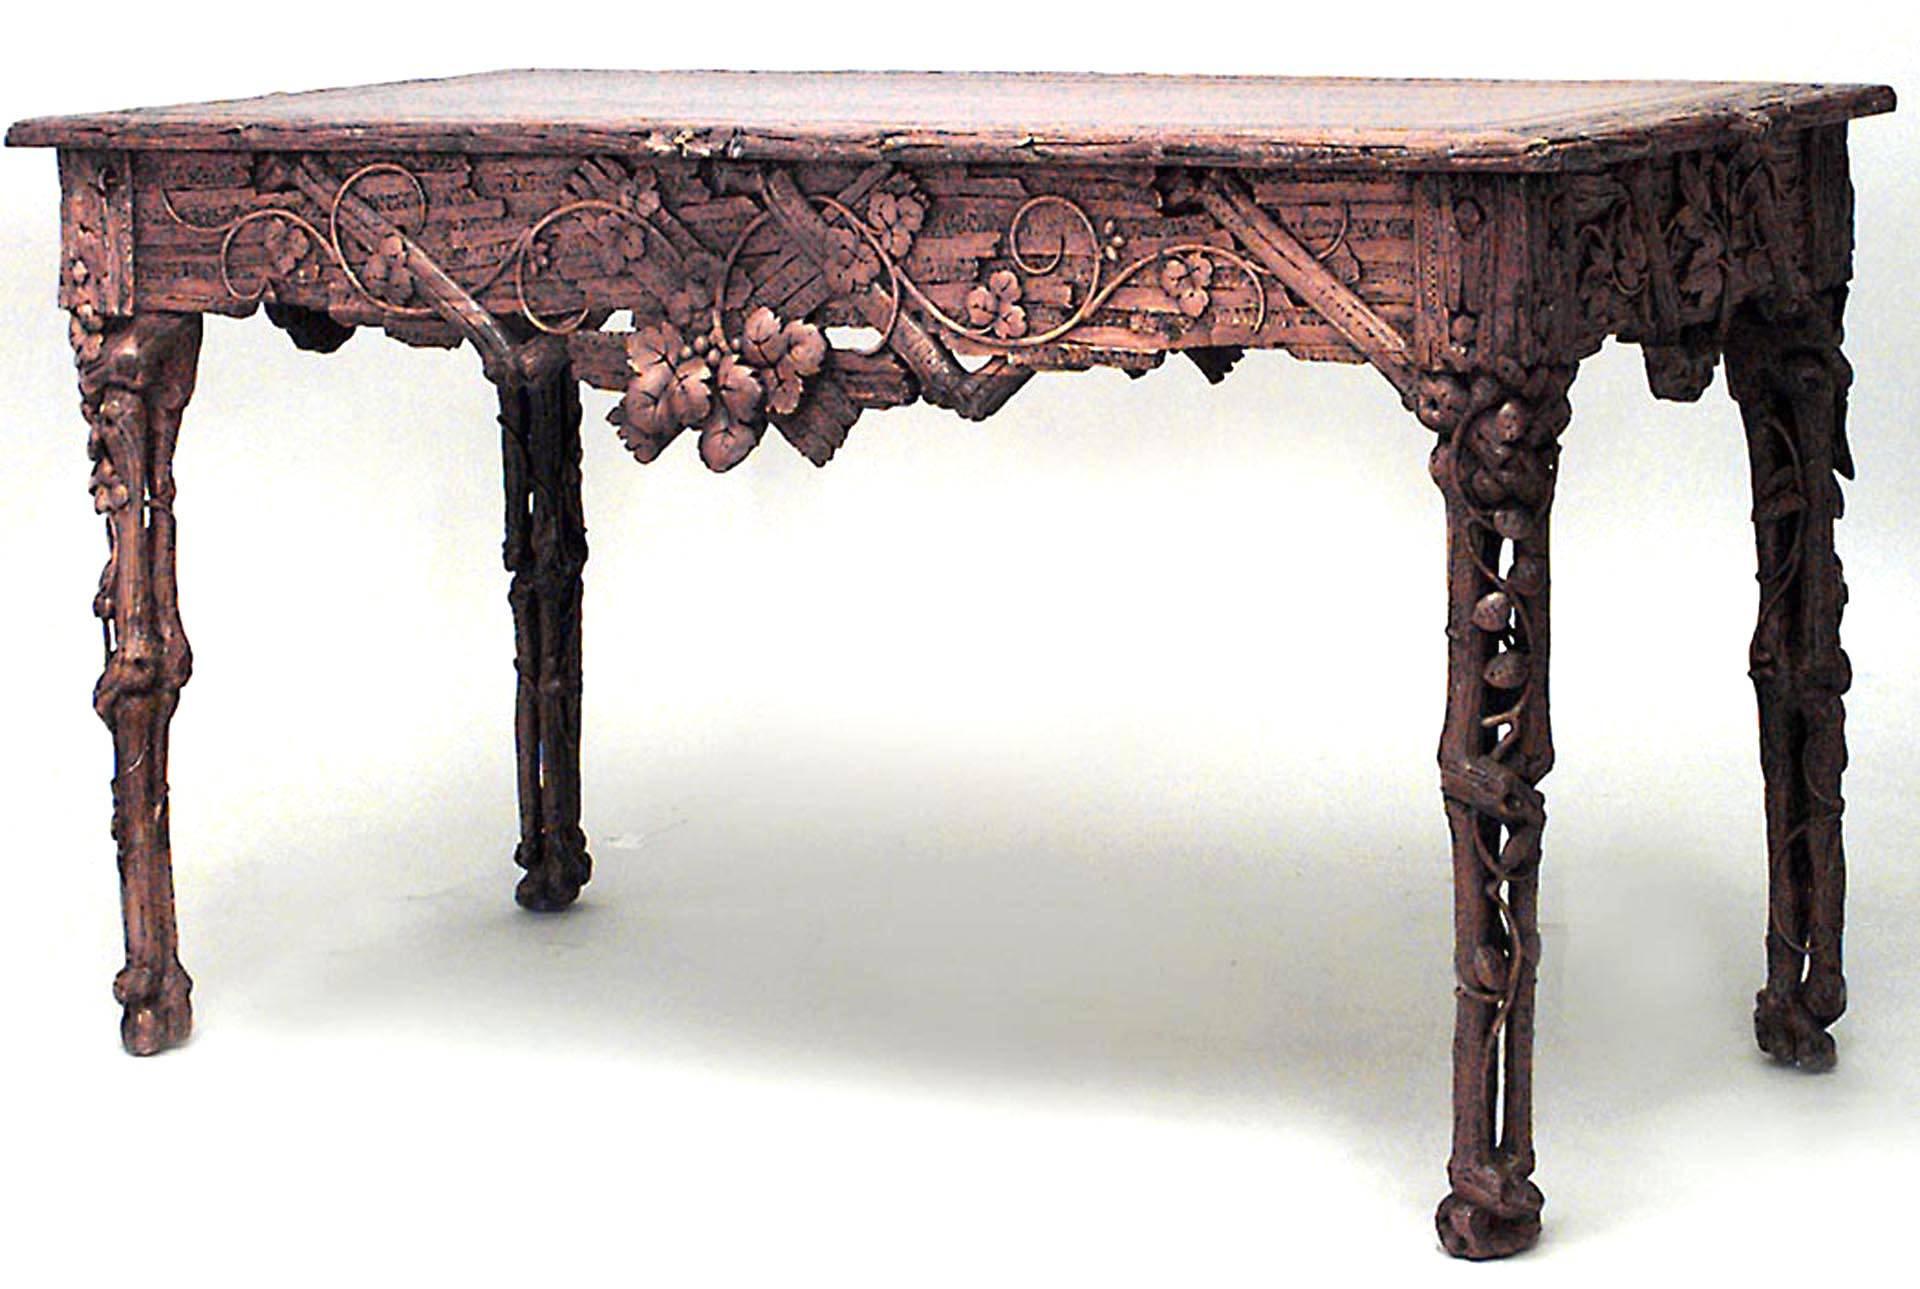 Rustic Black Forest style (German 19th Century) light walnut rectangular center table with carved leaf & vine design on apron with open cluster legs and tooled brown leather top.
